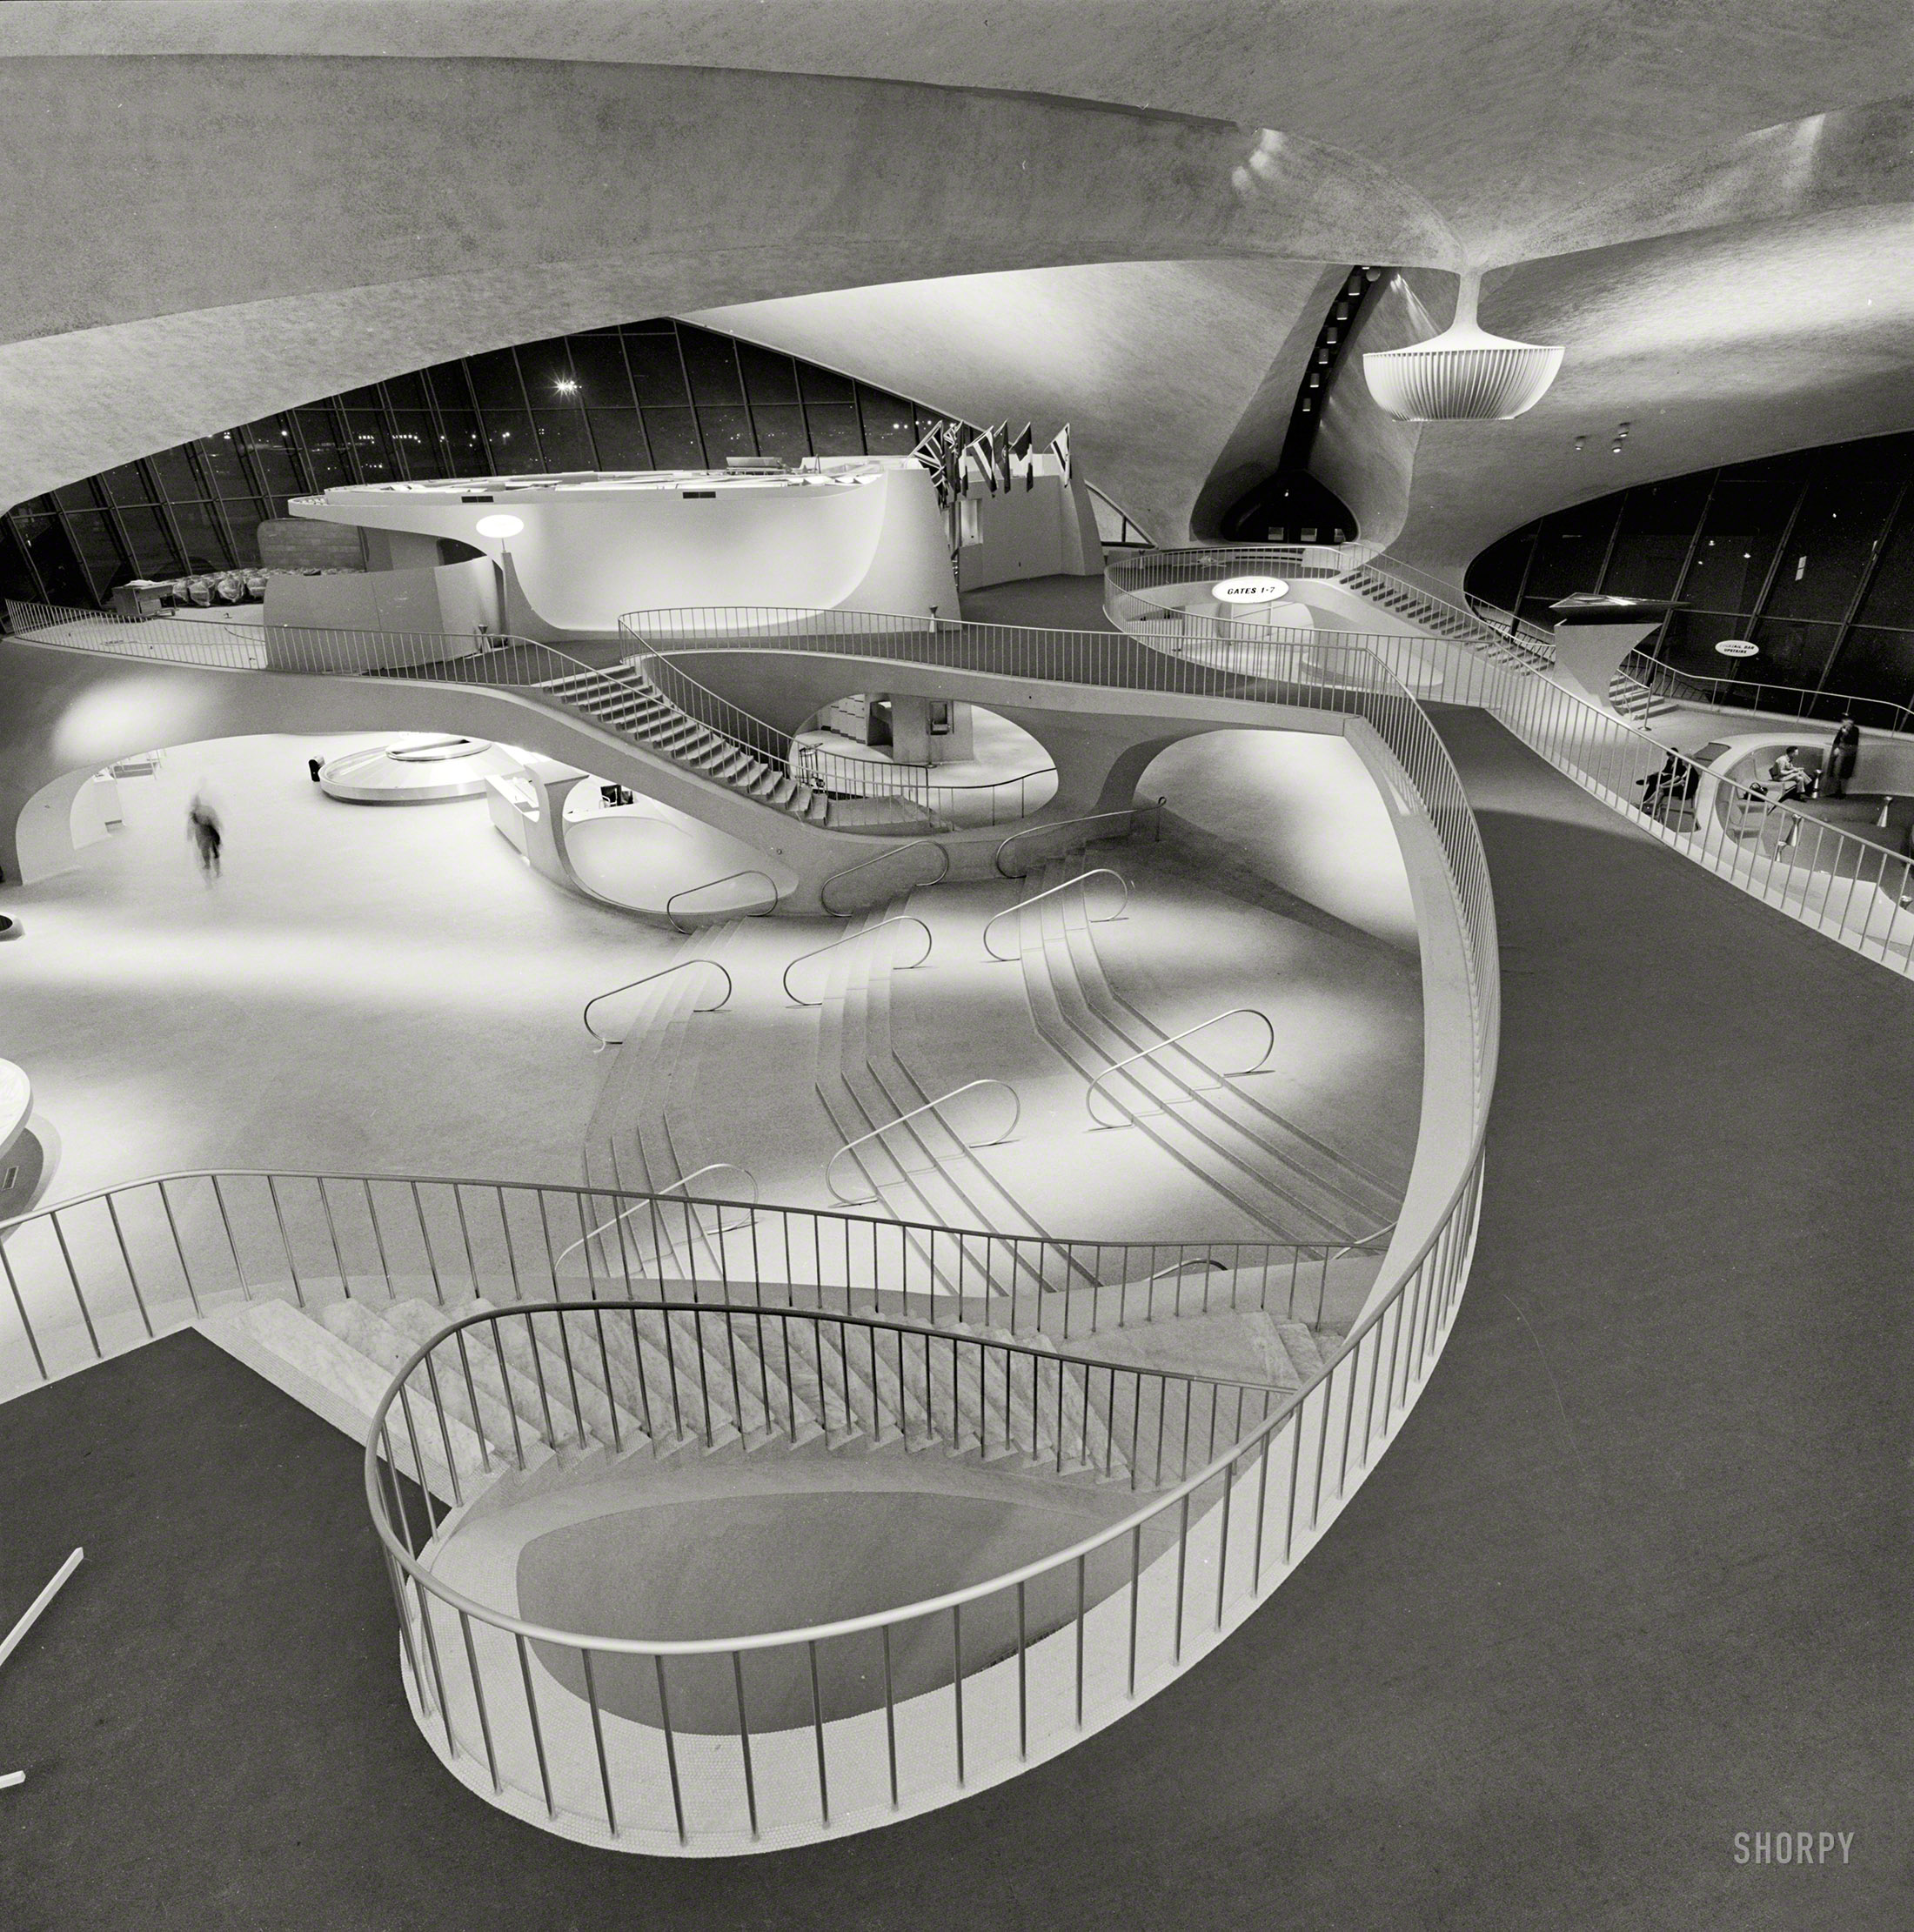 Circa 1964. "Trans World Airlines Terminal. Idlewild Airport, Queens, New York." Acetate negative by Balthazar Korab (1926-2013), Hungarian-born architectural photographer who documented the work of Eero Saarinen. View full size.